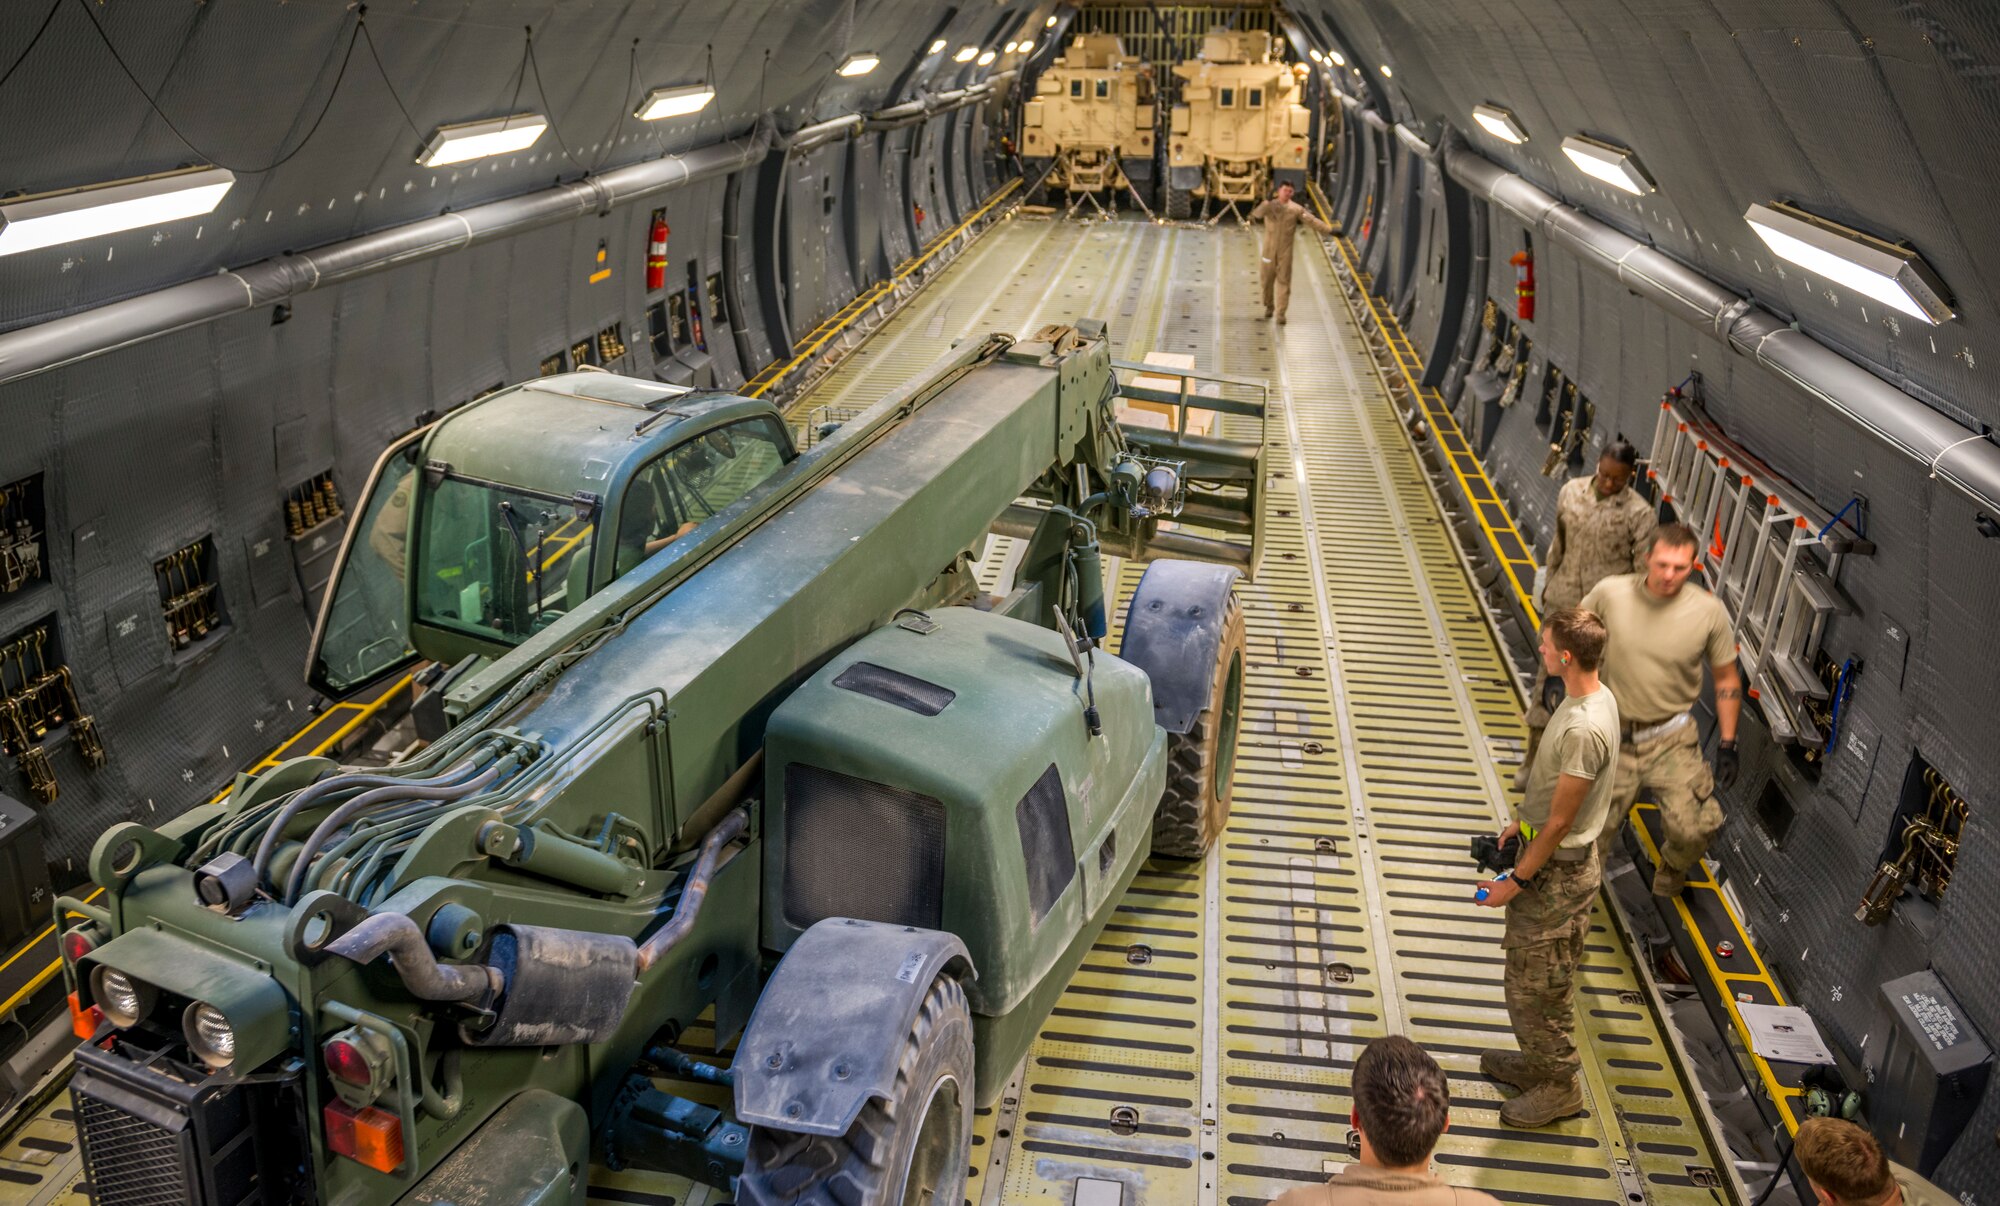 Airmen from the 9th Airlift Squadron and 455th Expeditionary Aerial Port Squadron with Marines from the Marine Expeditionary Brigade prepare to load vehicles into a C-5M Super Galaxy Oct. 6, 2014 at Camp Bastion, Afghanistan. Airmen and Marines loaded more than 266,000 pounds of cargo onto the C-5M as part of retrograde operations in Afghanistan. Aircrews for the retrograde operations, managed by the 385th Air Expeditionary Group Detachment 1, surpassed 11 million pounds of cargo transported in a 50-day period. During this time frame, crews under the 385th AEG broke Air Mobility Command’s operational cargo load record five times. The heaviest load to date is 280,880 pounds. (U.S. Air Force photo by Staff Sgt. Jeremy Bowcock)